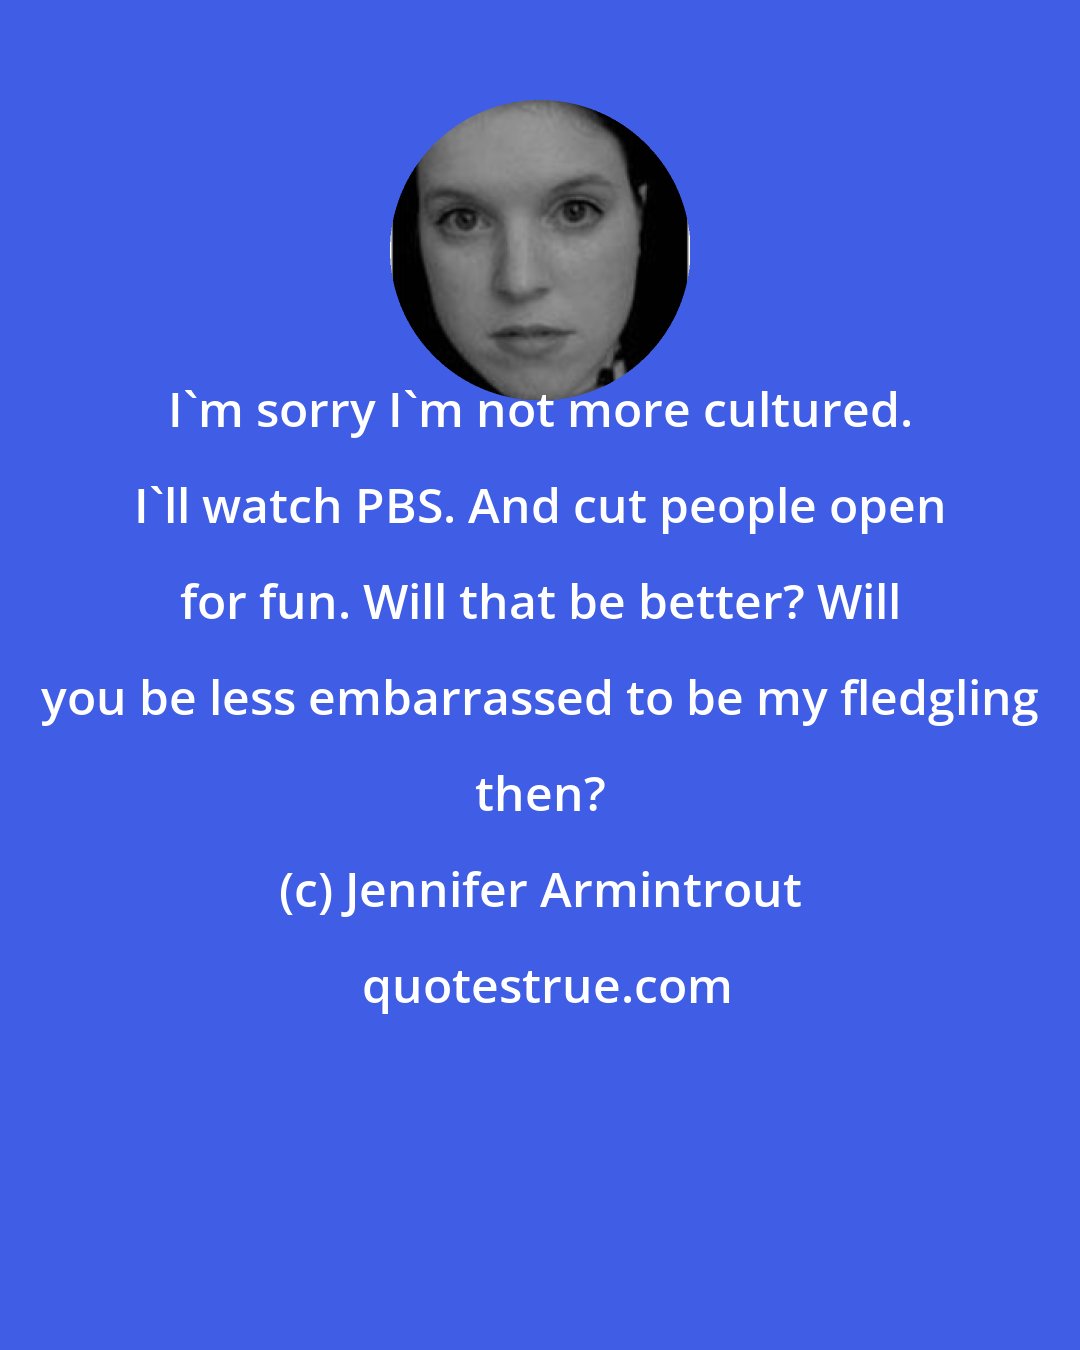 Jennifer Armintrout: I'm sorry I'm not more cultured. I'll watch PBS. And cut people open for fun. Will that be better? Will you be less embarrassed to be my fledgling then?